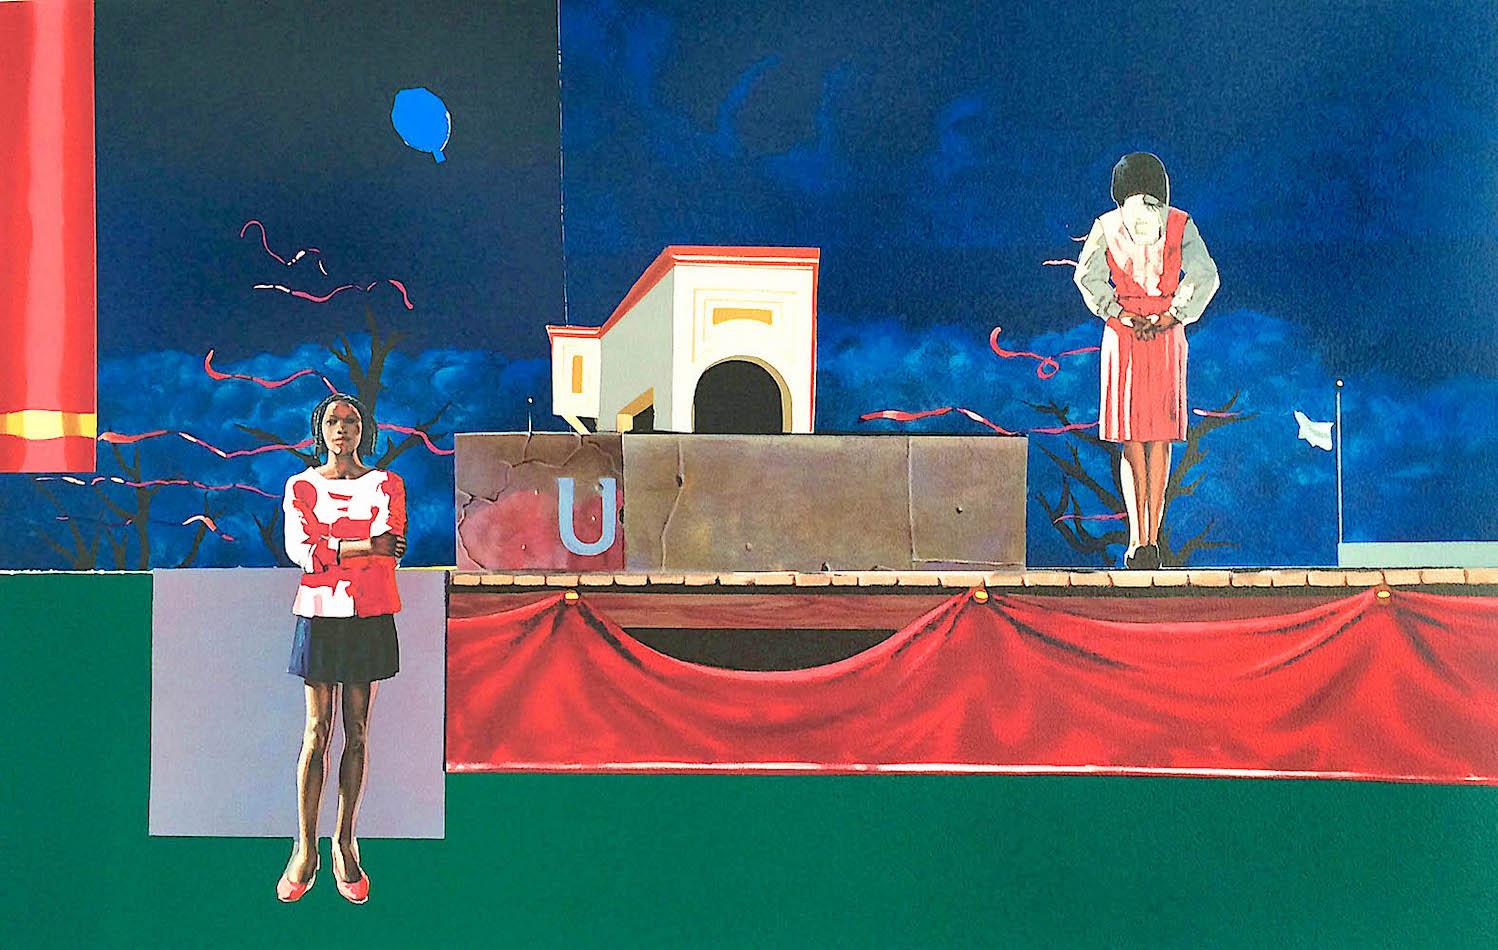 Hughie Lee-Smith Figurative Print - NOCTURNE Signed Lithograph, Black Women Theater Stage Night Sky Balloon Ribbons